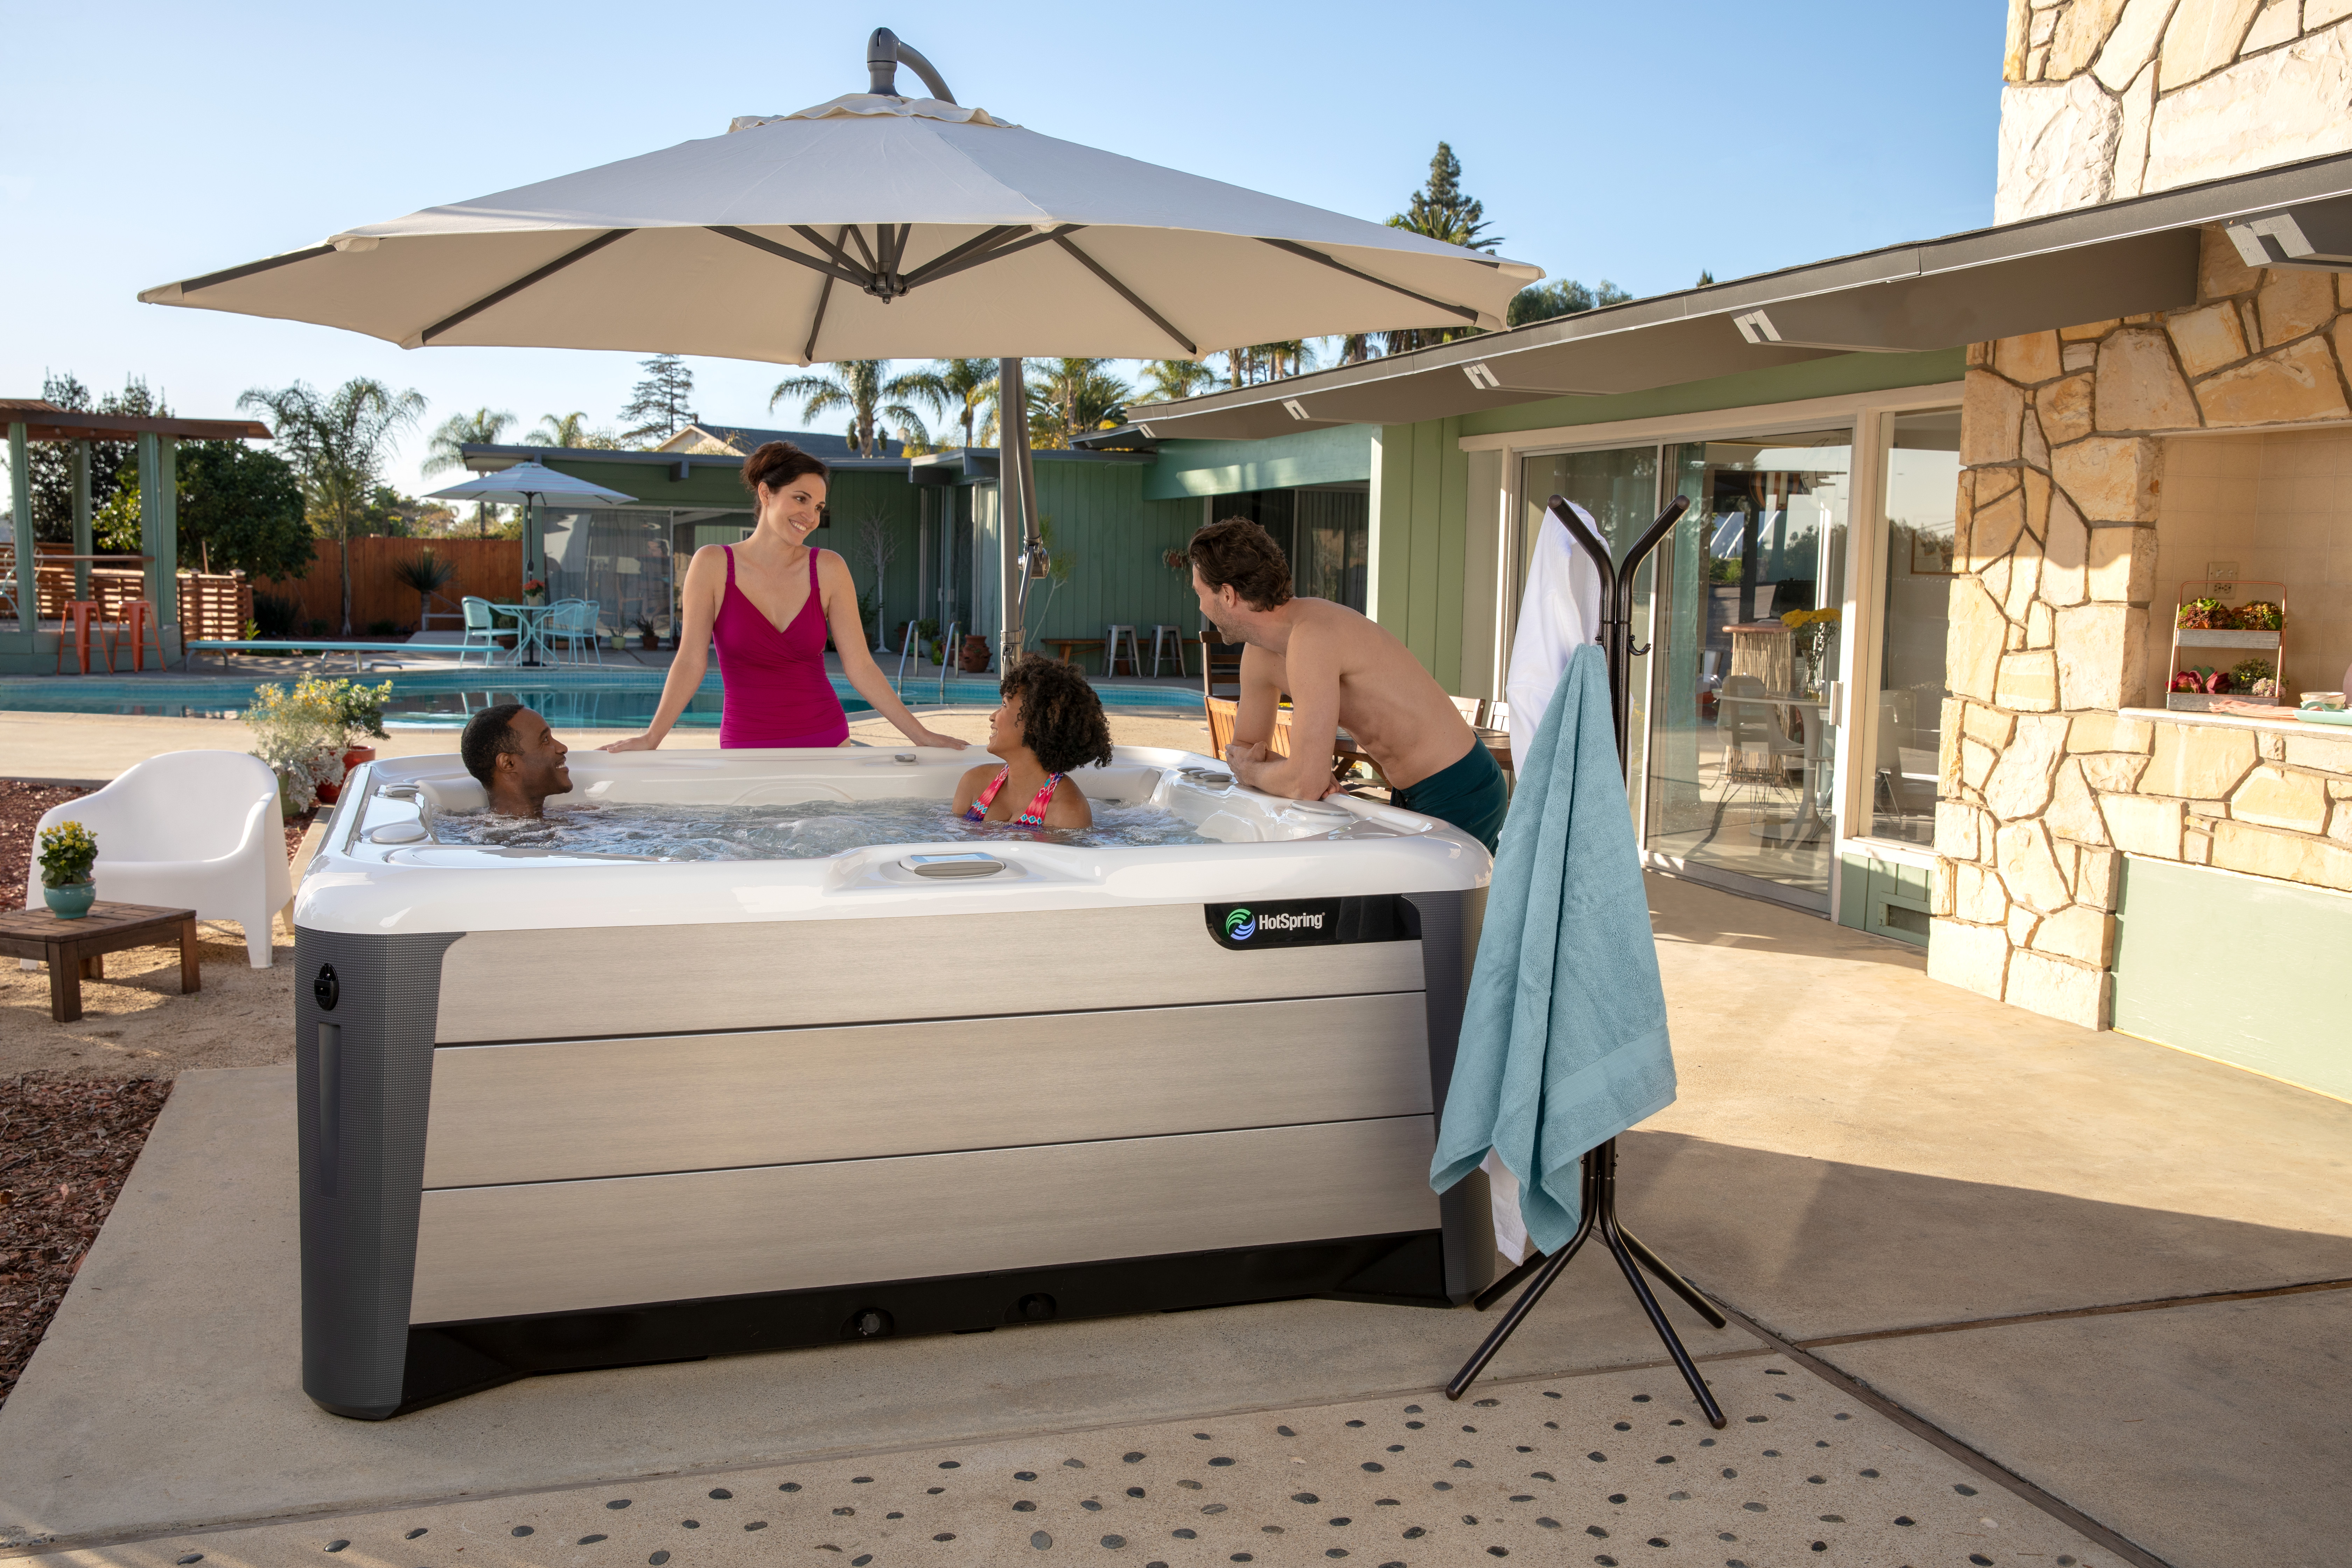 Which Hot Tub is Right for You? Our Top Selling Models and Why